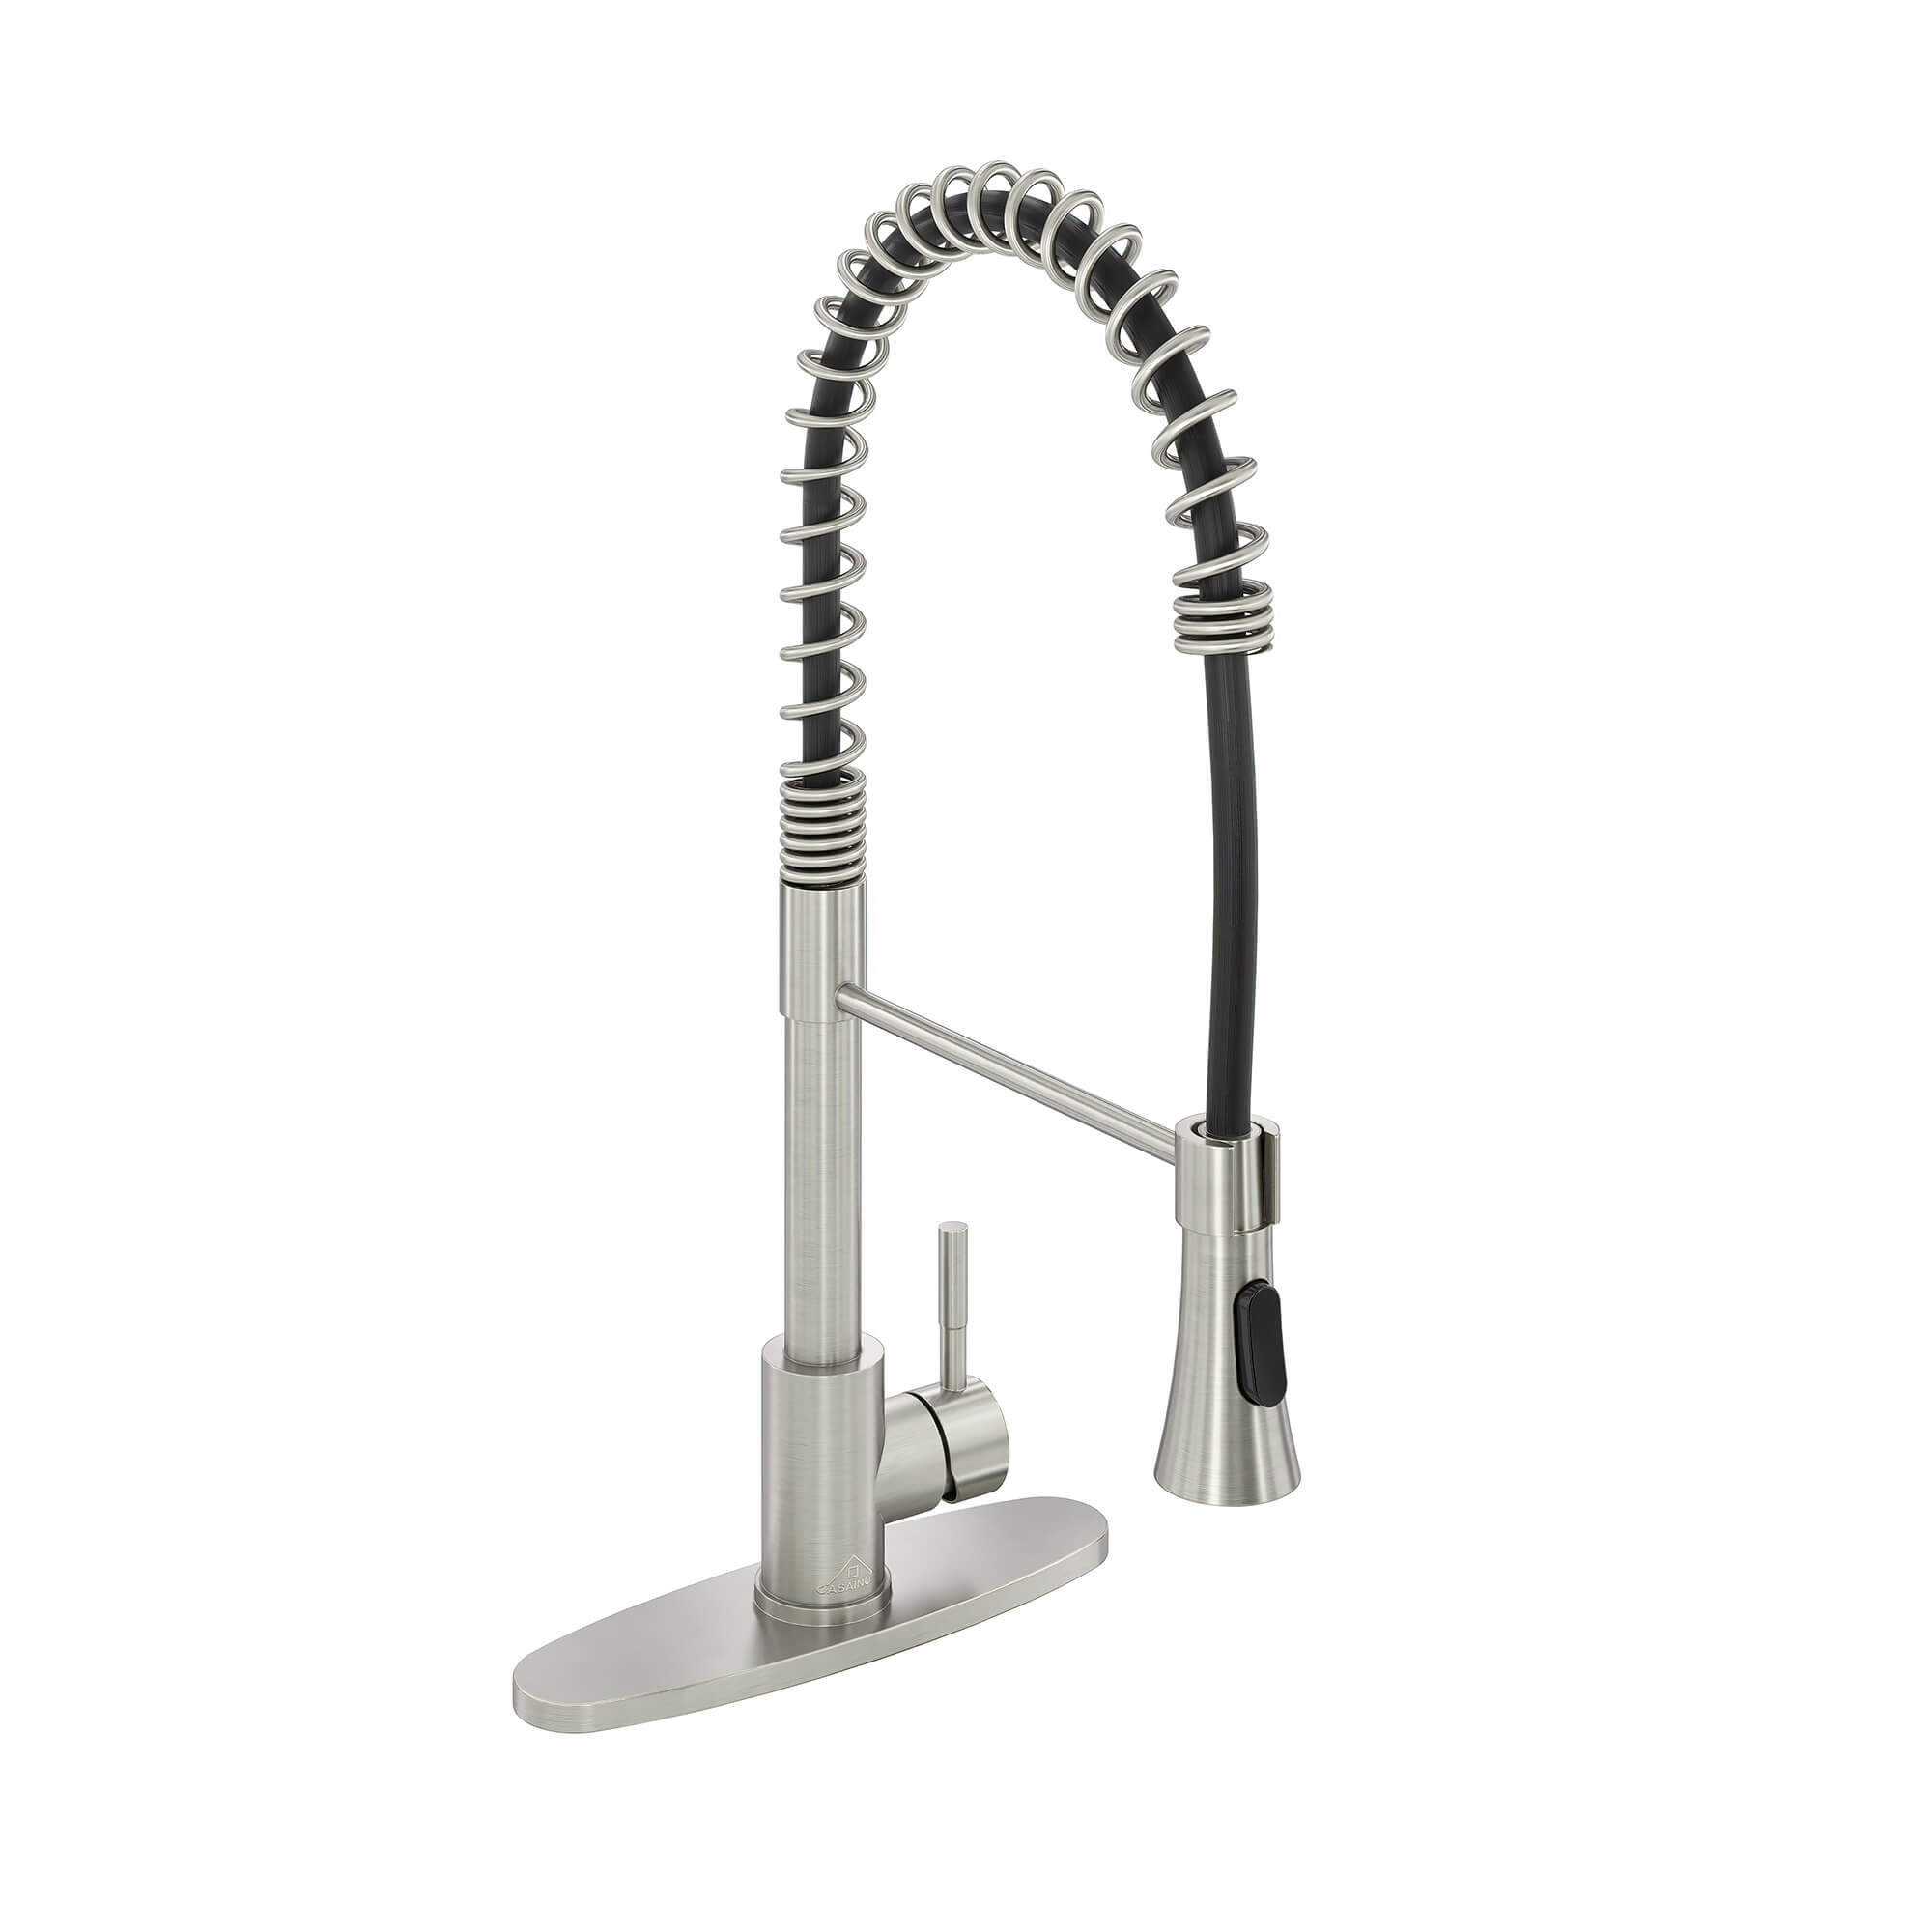 CASAINC 1.8GPM Non-pull Kitchen Faucet with Base Plate in Matte Black and More-CASAINC